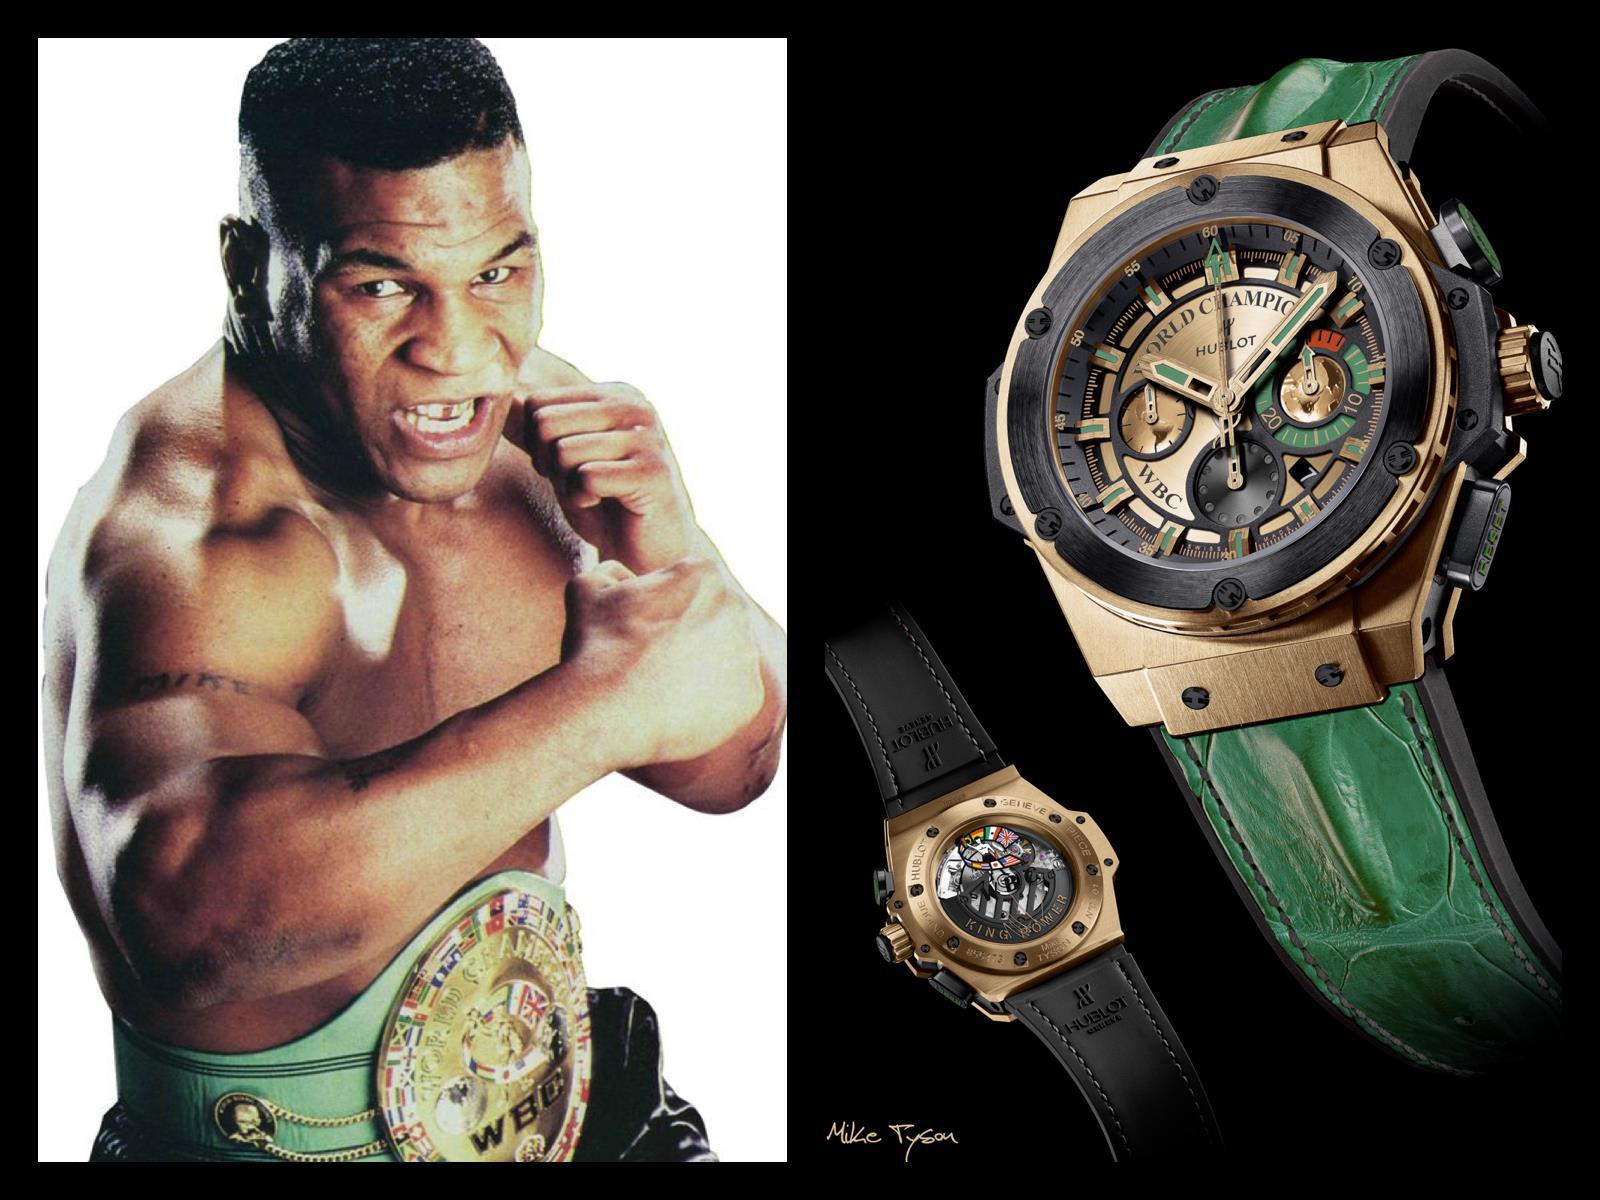 Mike Tyson watch wallpapers and images - wallpapers, pictures, photos